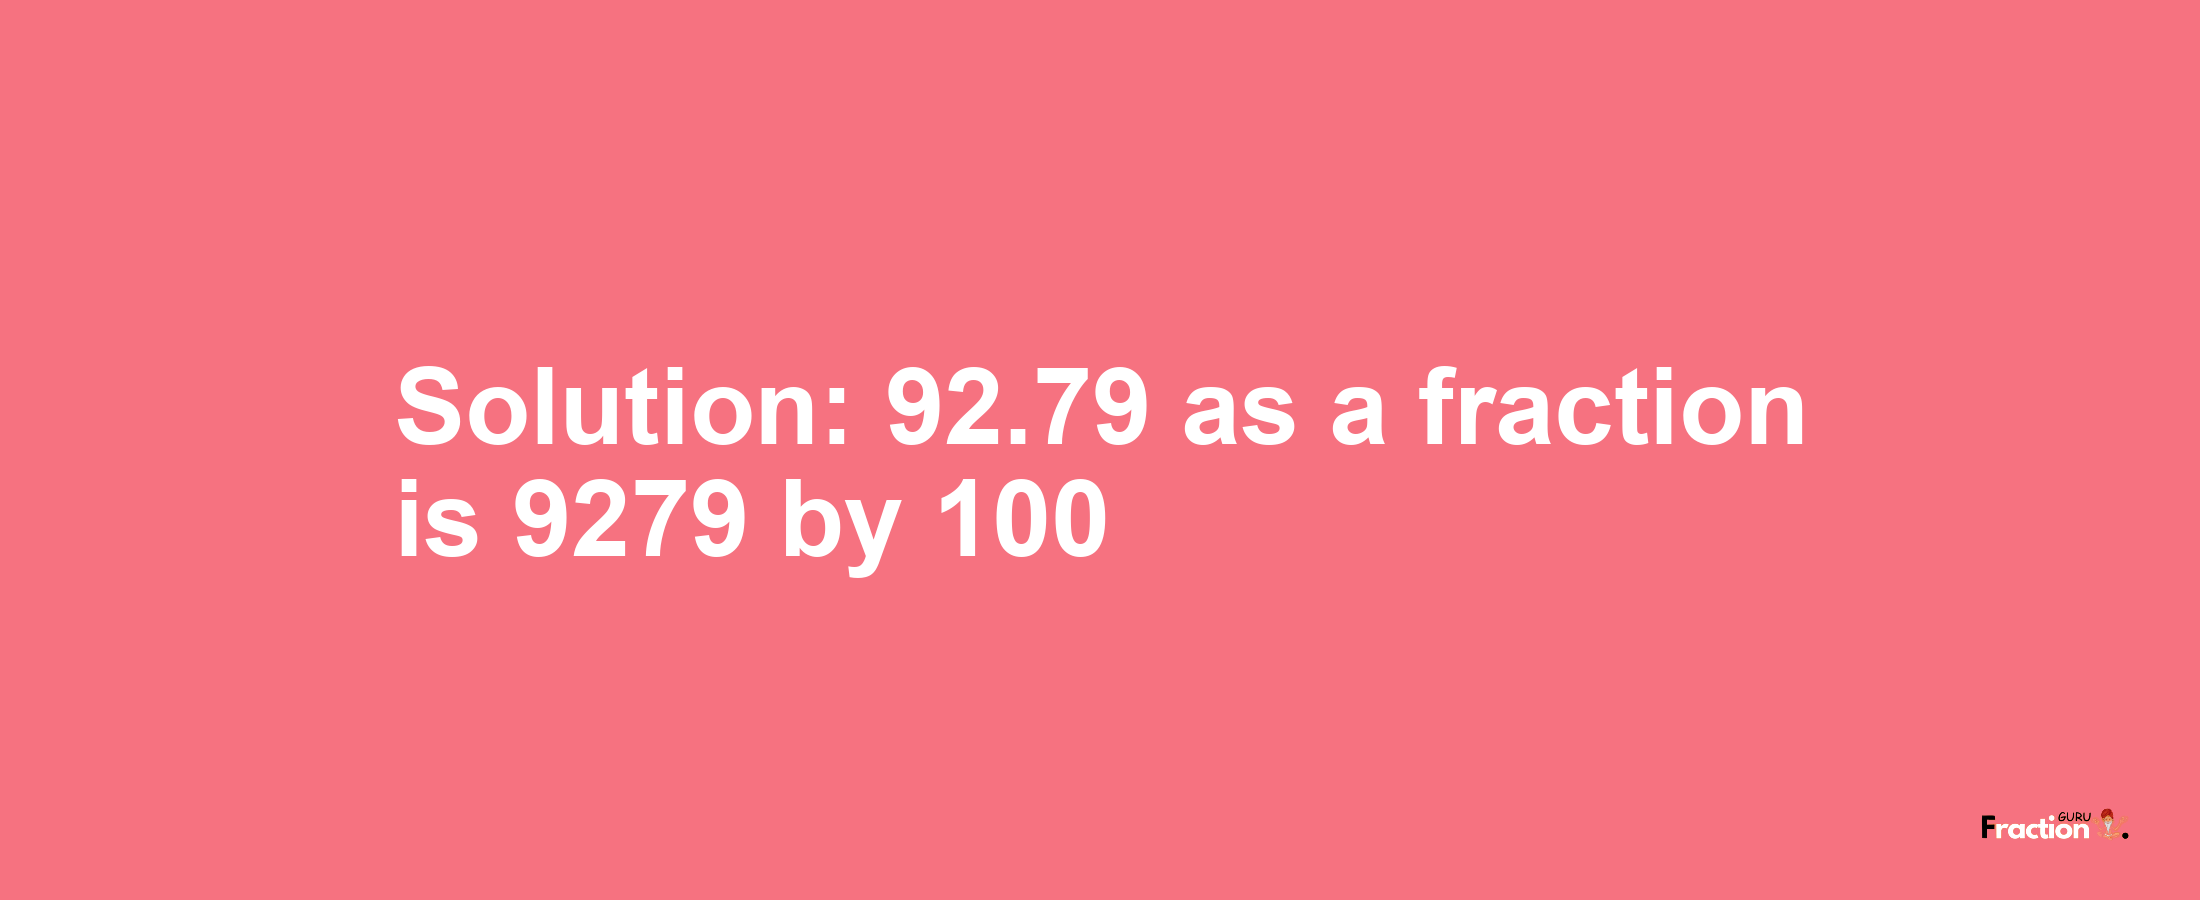 Solution:92.79 as a fraction is 9279/100